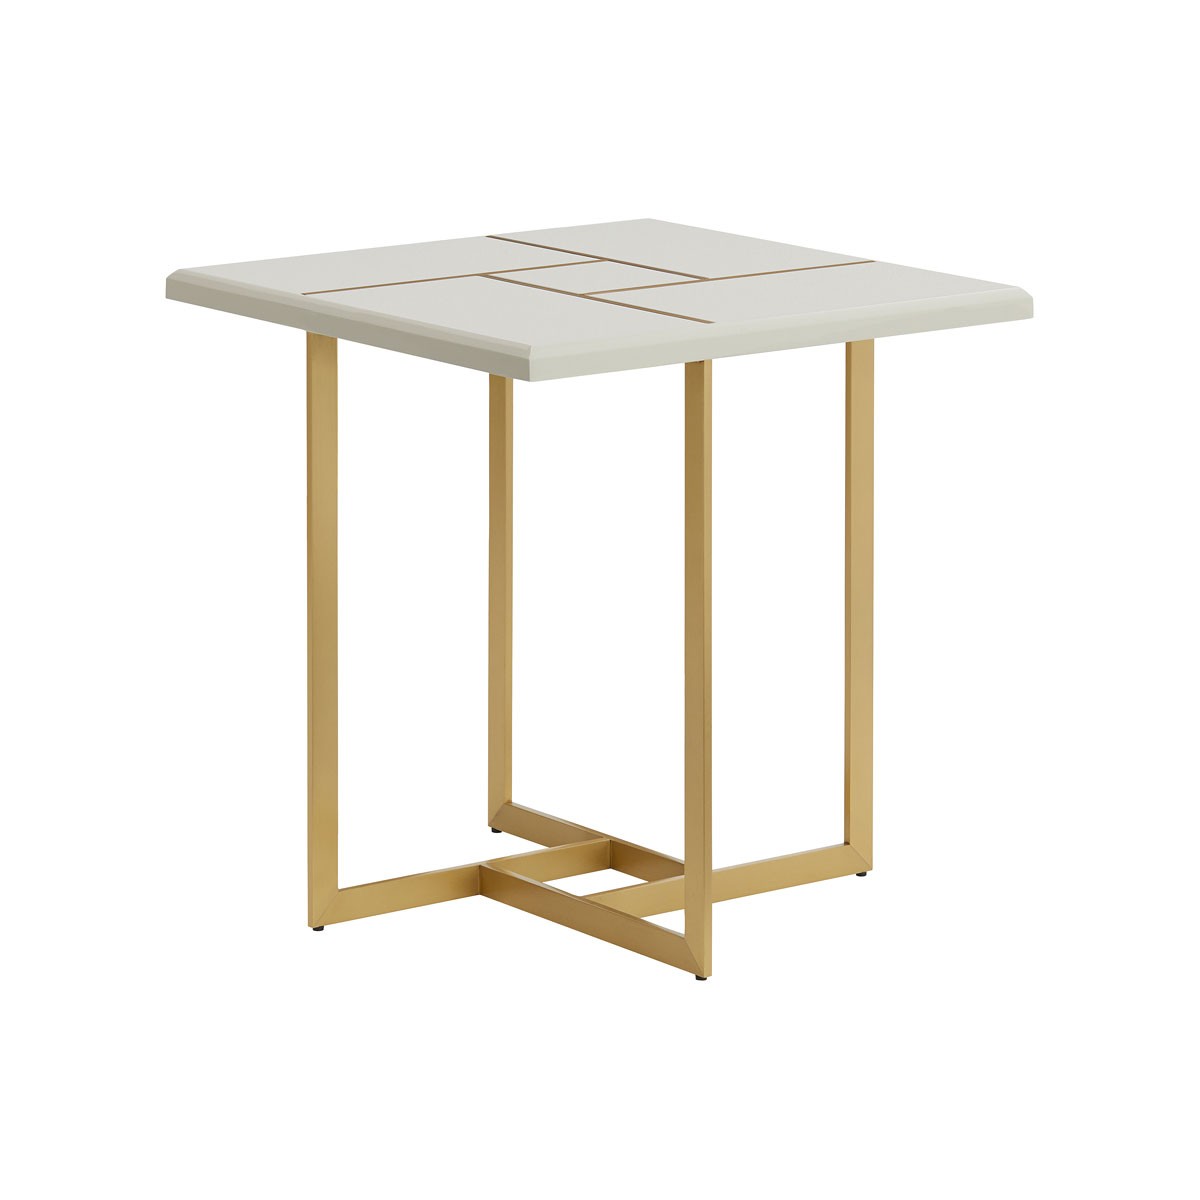 The Gabriel Side Table